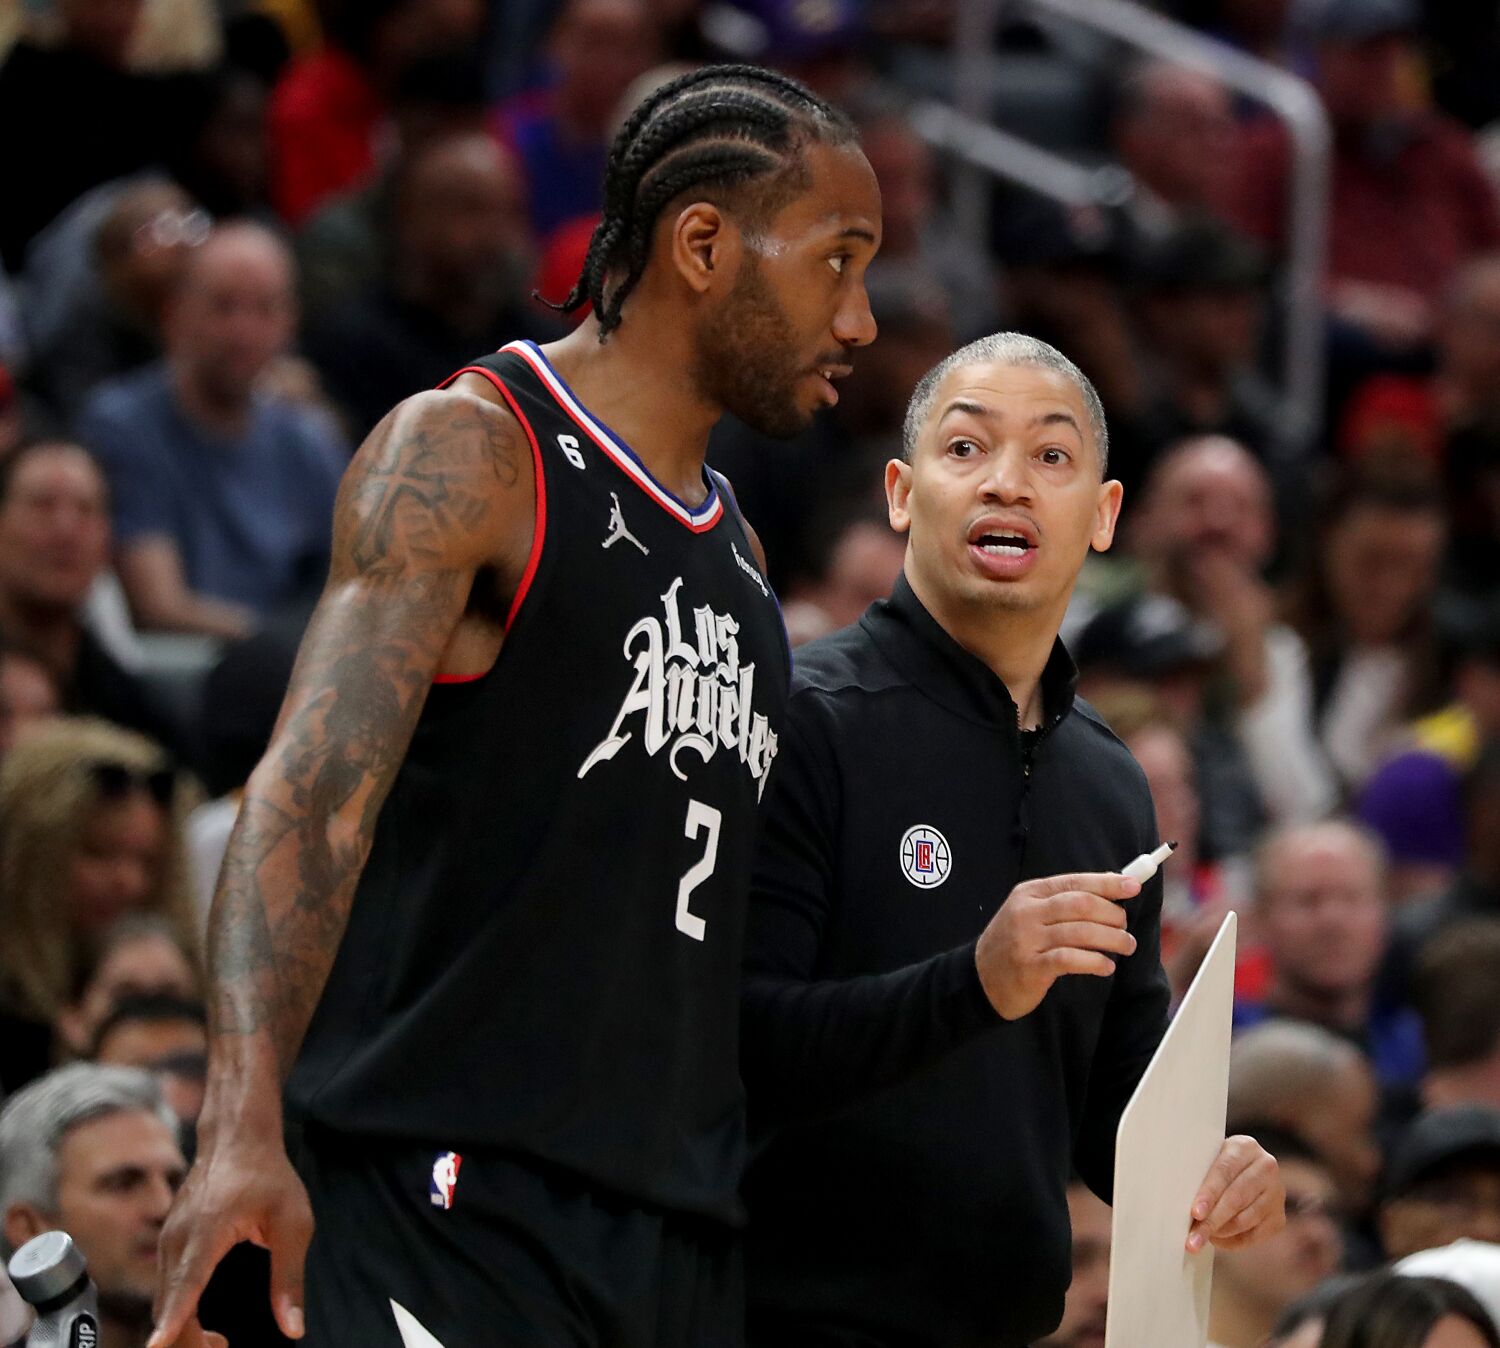 As NBA coaching carousel turns, Tyronn Lue is said to be seeking security with Clippers